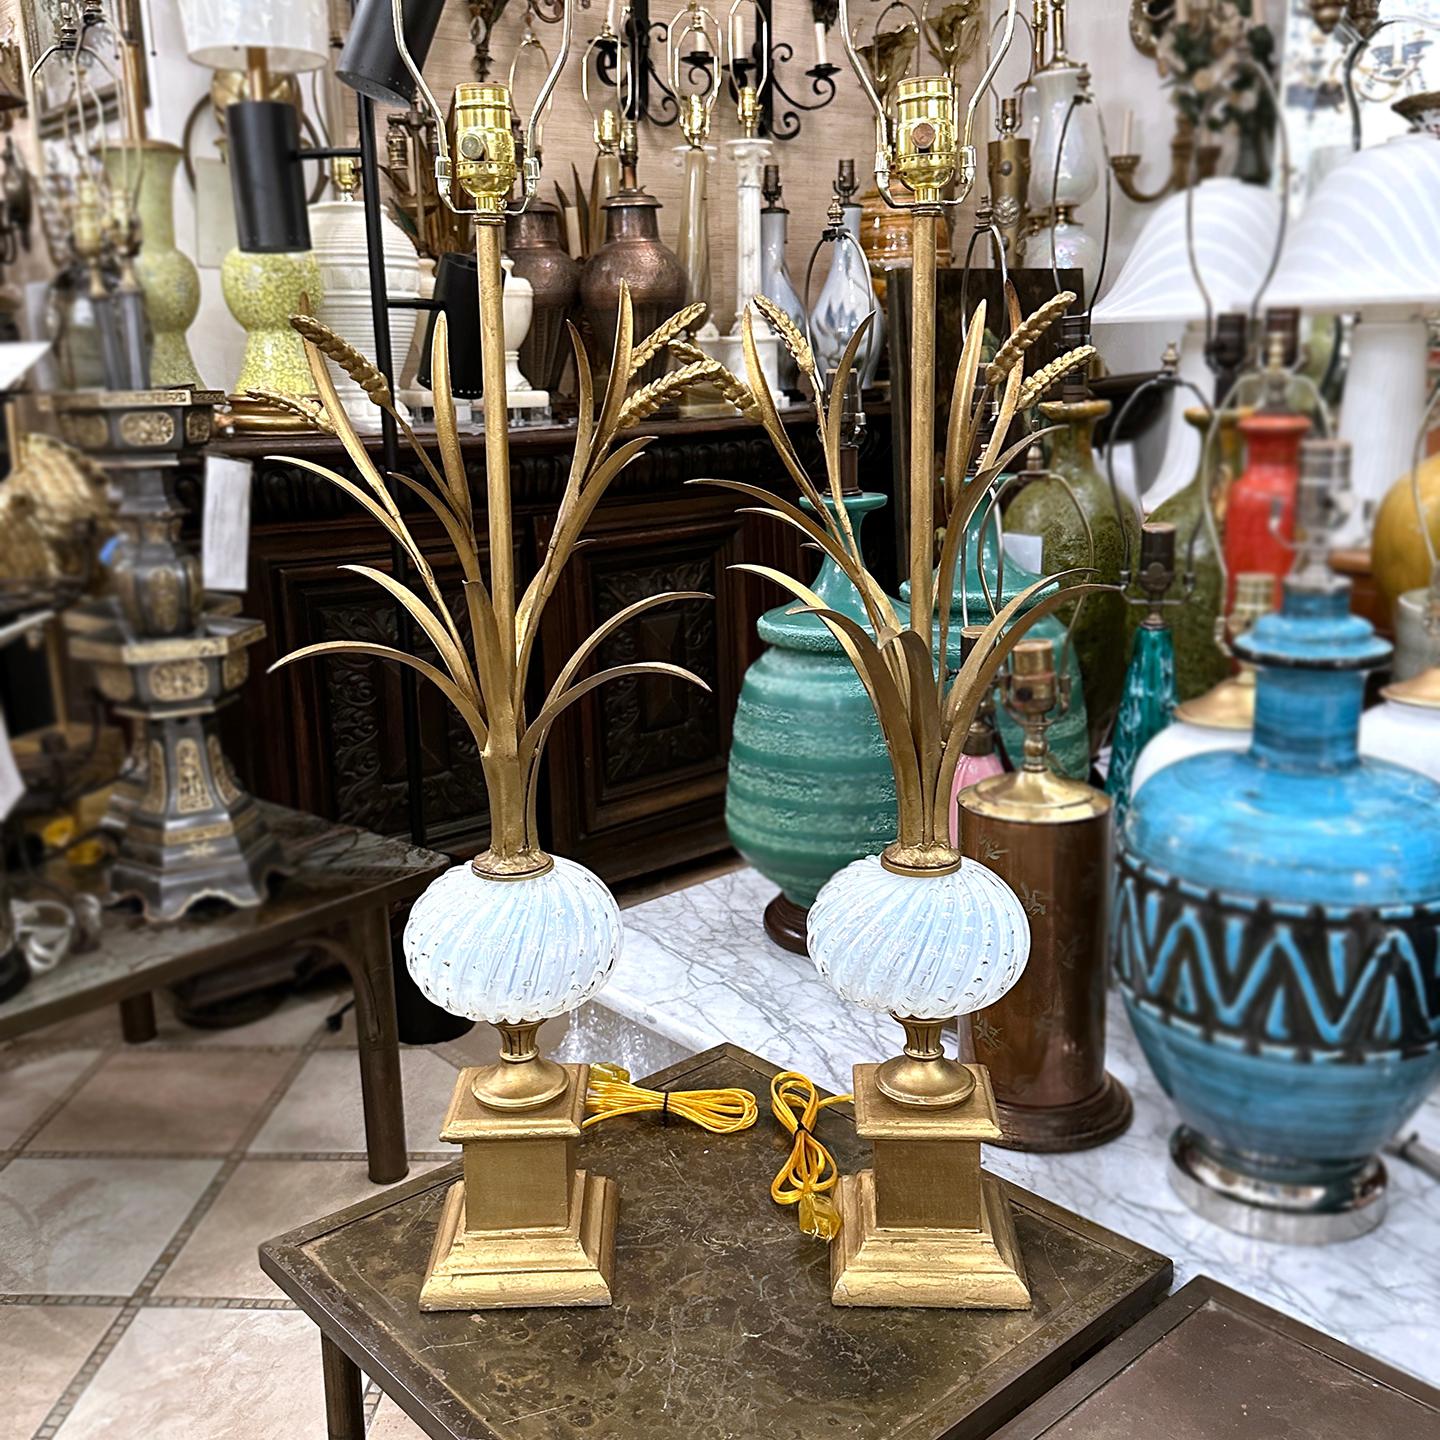 Pair of circa 1950’s Italian gilt metal lamps with Murano glass body.

Measurements:
Height of body: 28″
Height to shade rest: 38″
Width: 11″
Depth: 11″